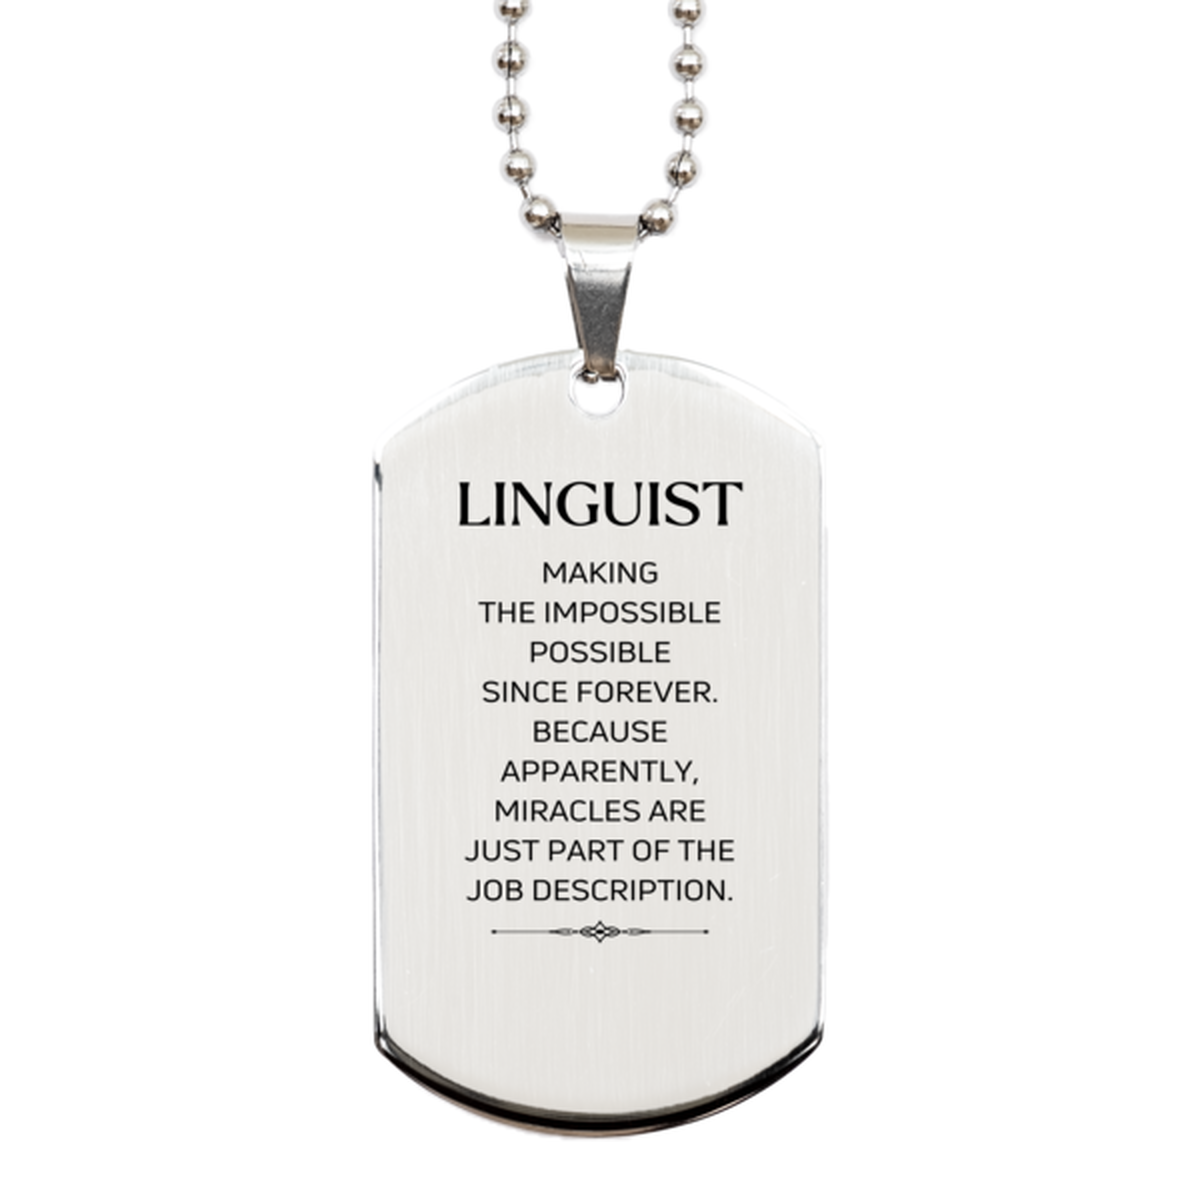 Funny Linguist Gifts, Miracles are just part of the job description, Inspirational Birthday Silver Dog Tag For Linguist, Men, Women, Coworkers, Friends, Boss